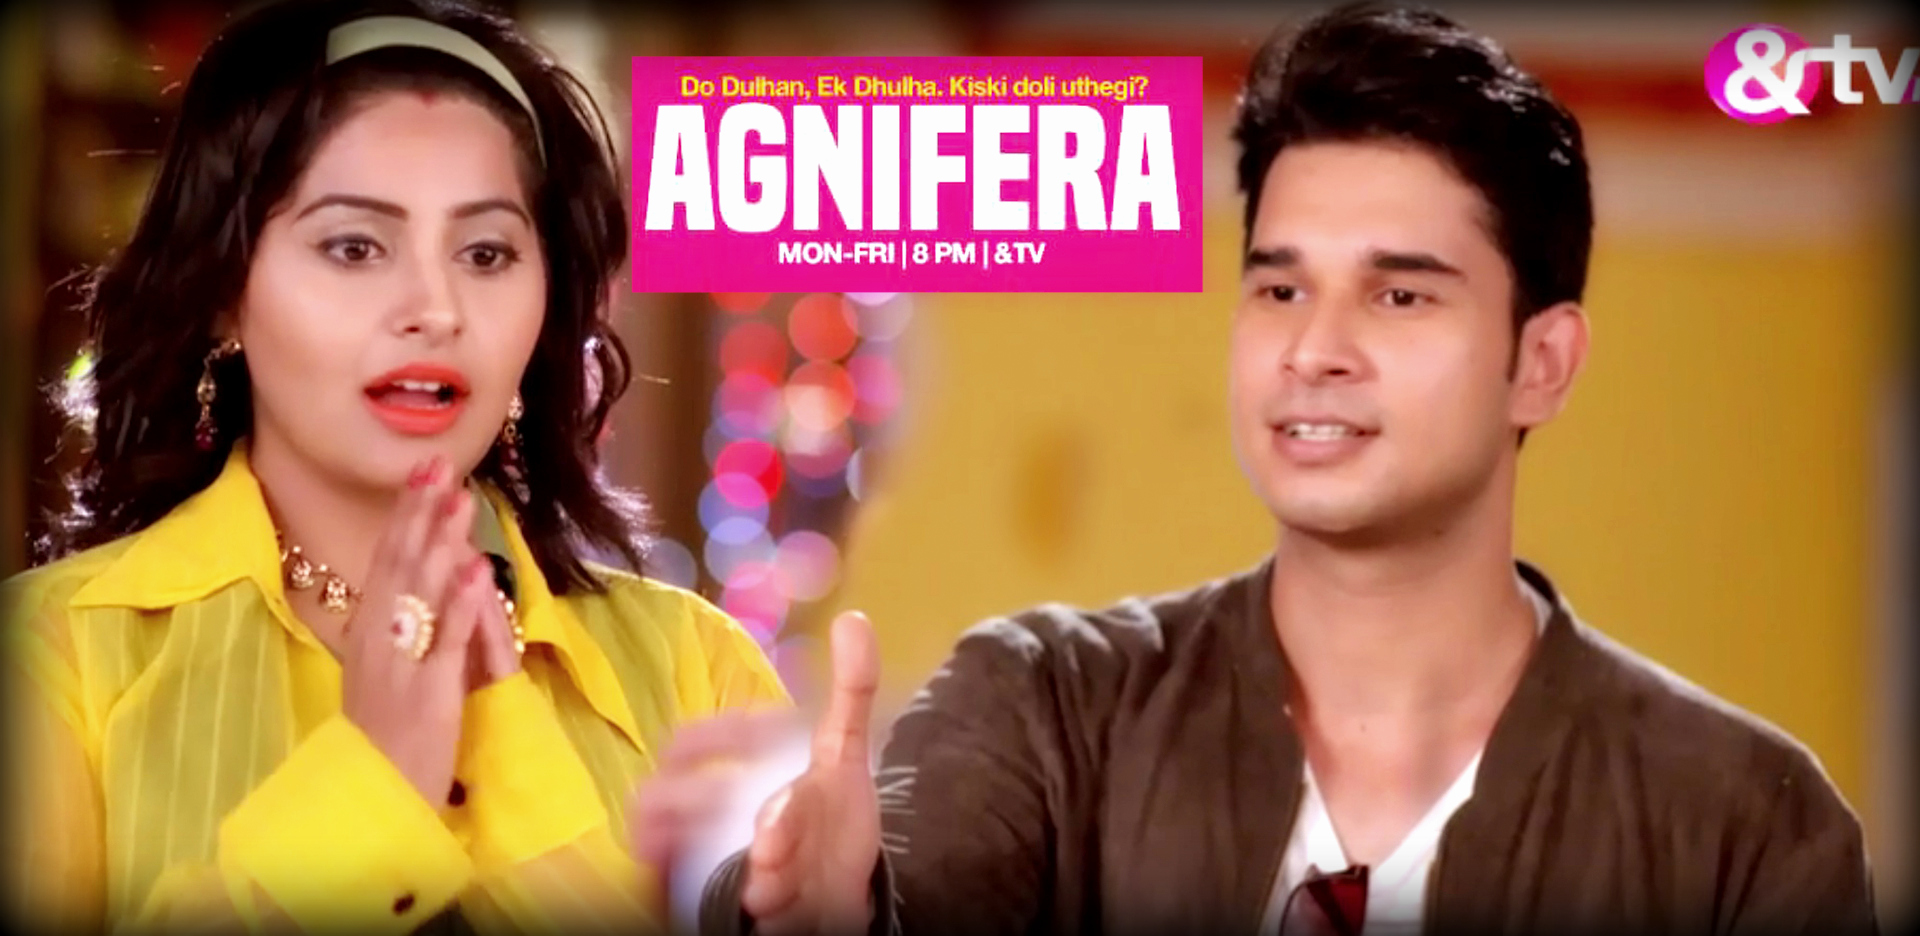 After Playing A Major Part In Pyaar Tune Kya Kiya Ankit Bhetiwal Joins The Cast Of Agnifera As Mac Official video for the new megahit by t.i. bollywood dhamaka